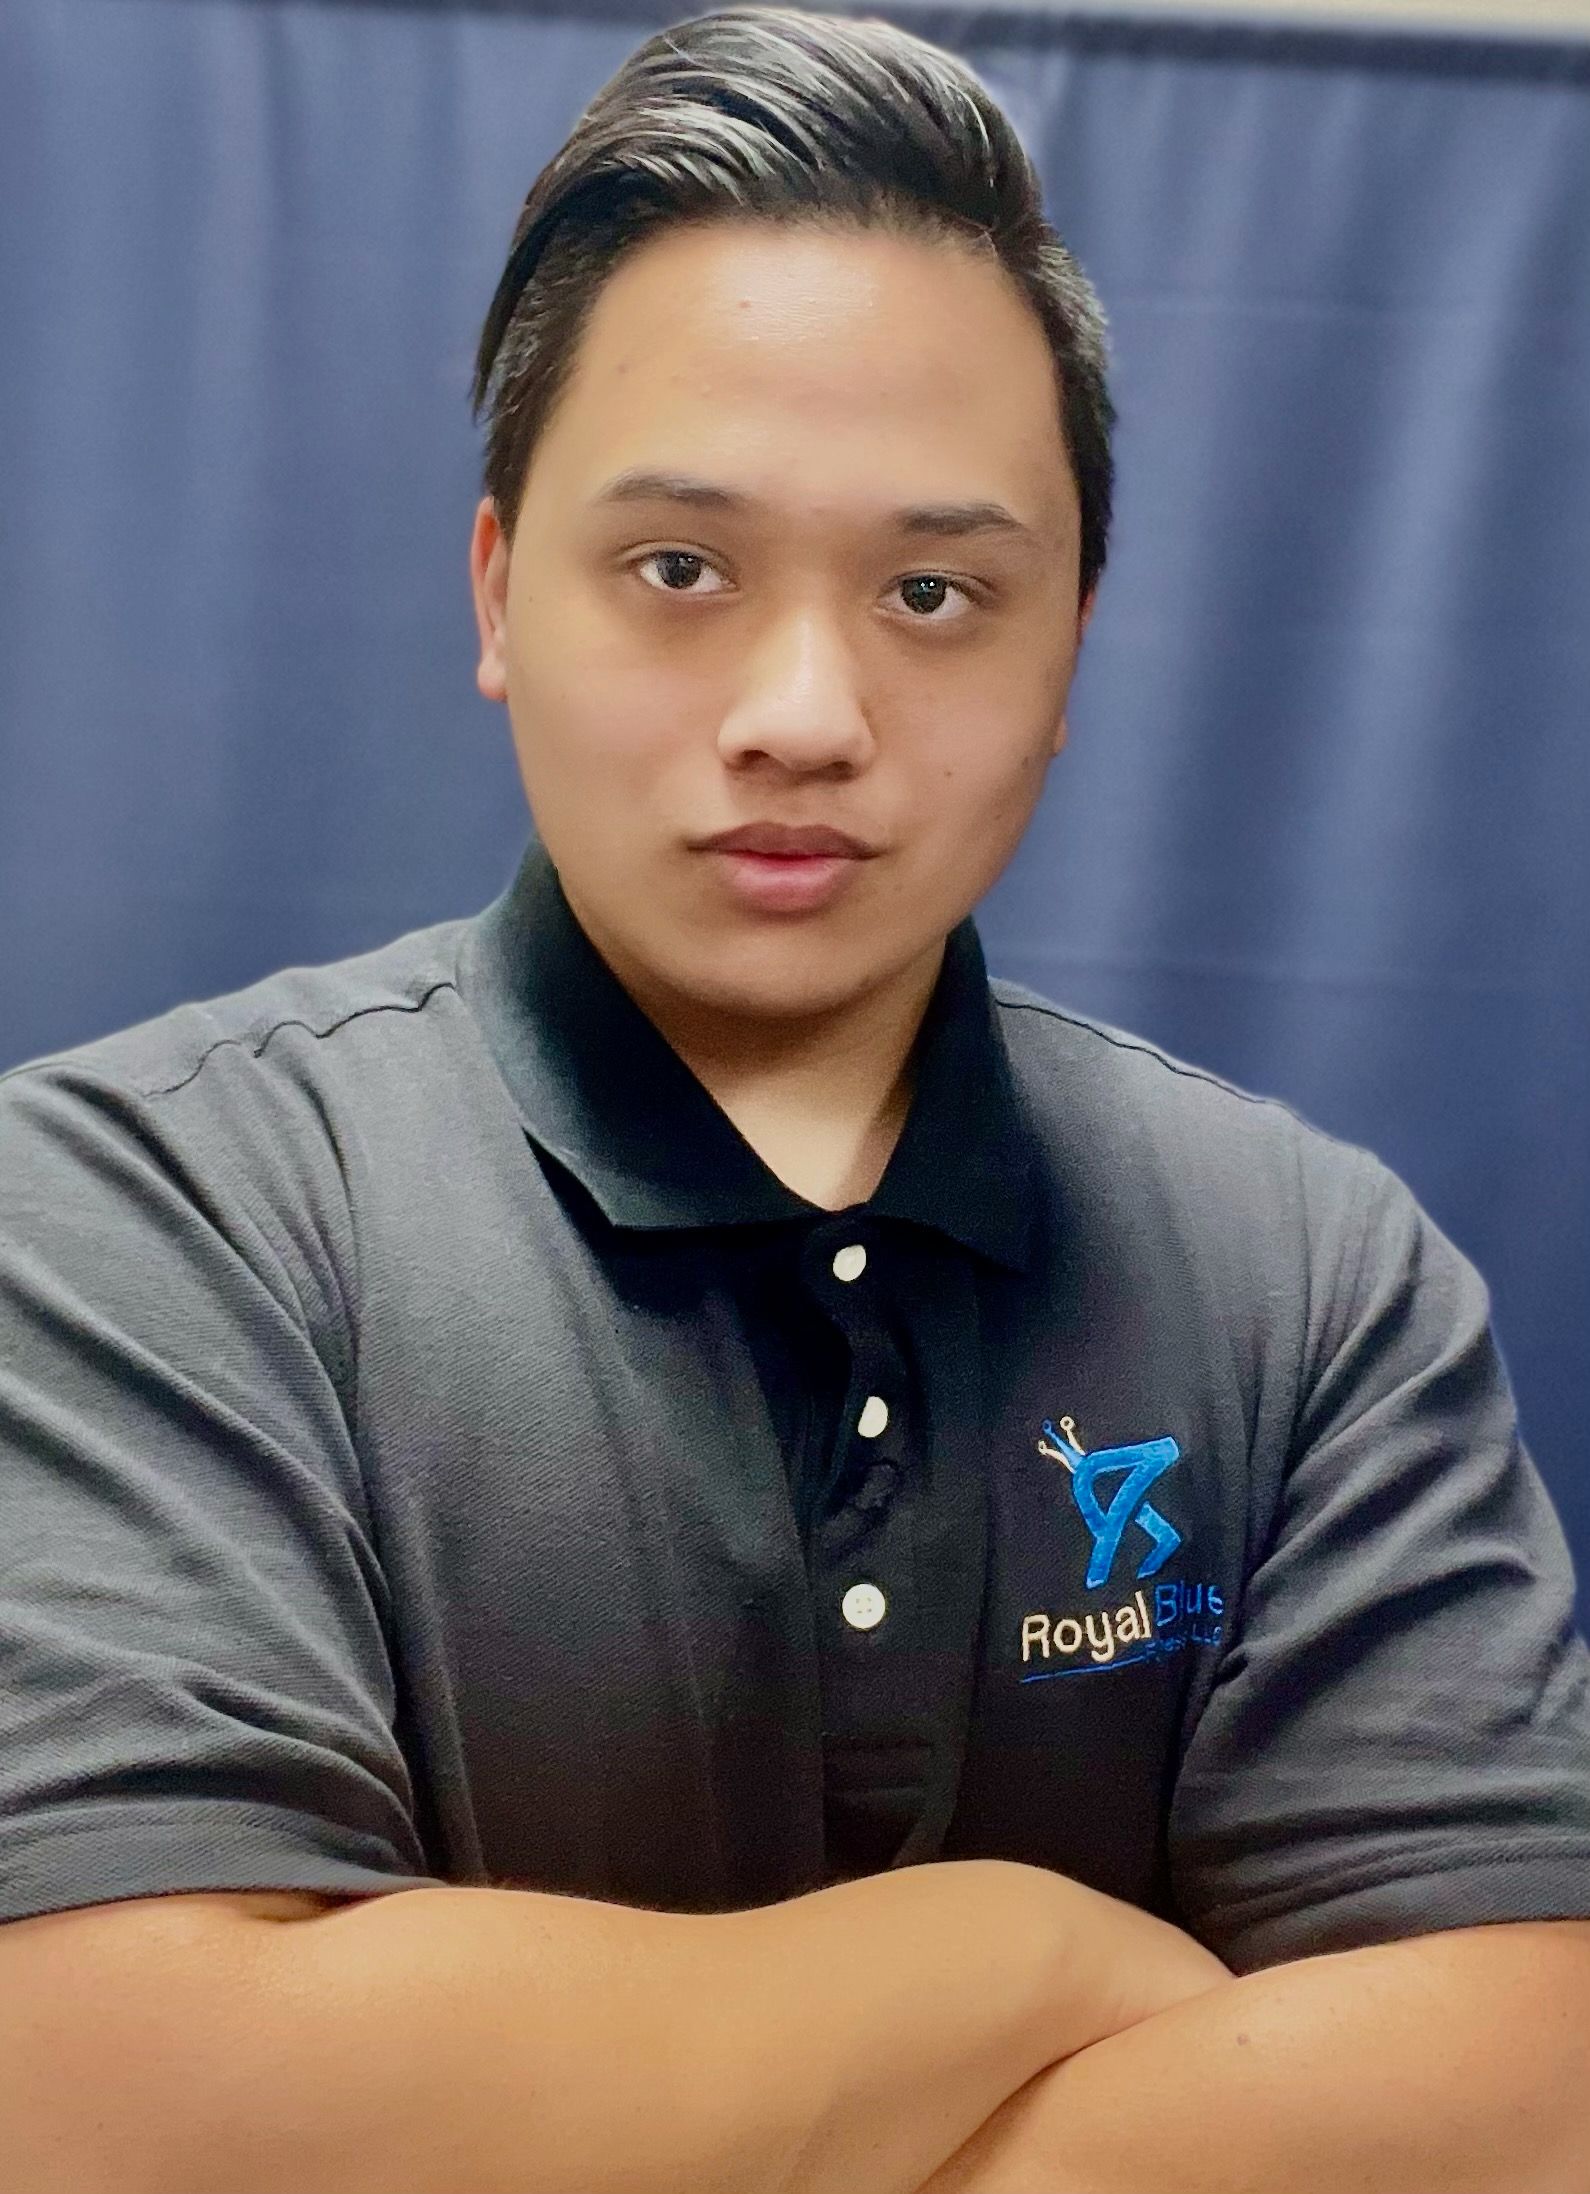 Kennedy Rizon in a black polo shirt with the Royal Blue Fitness logo, standing confidently with arms crossed.